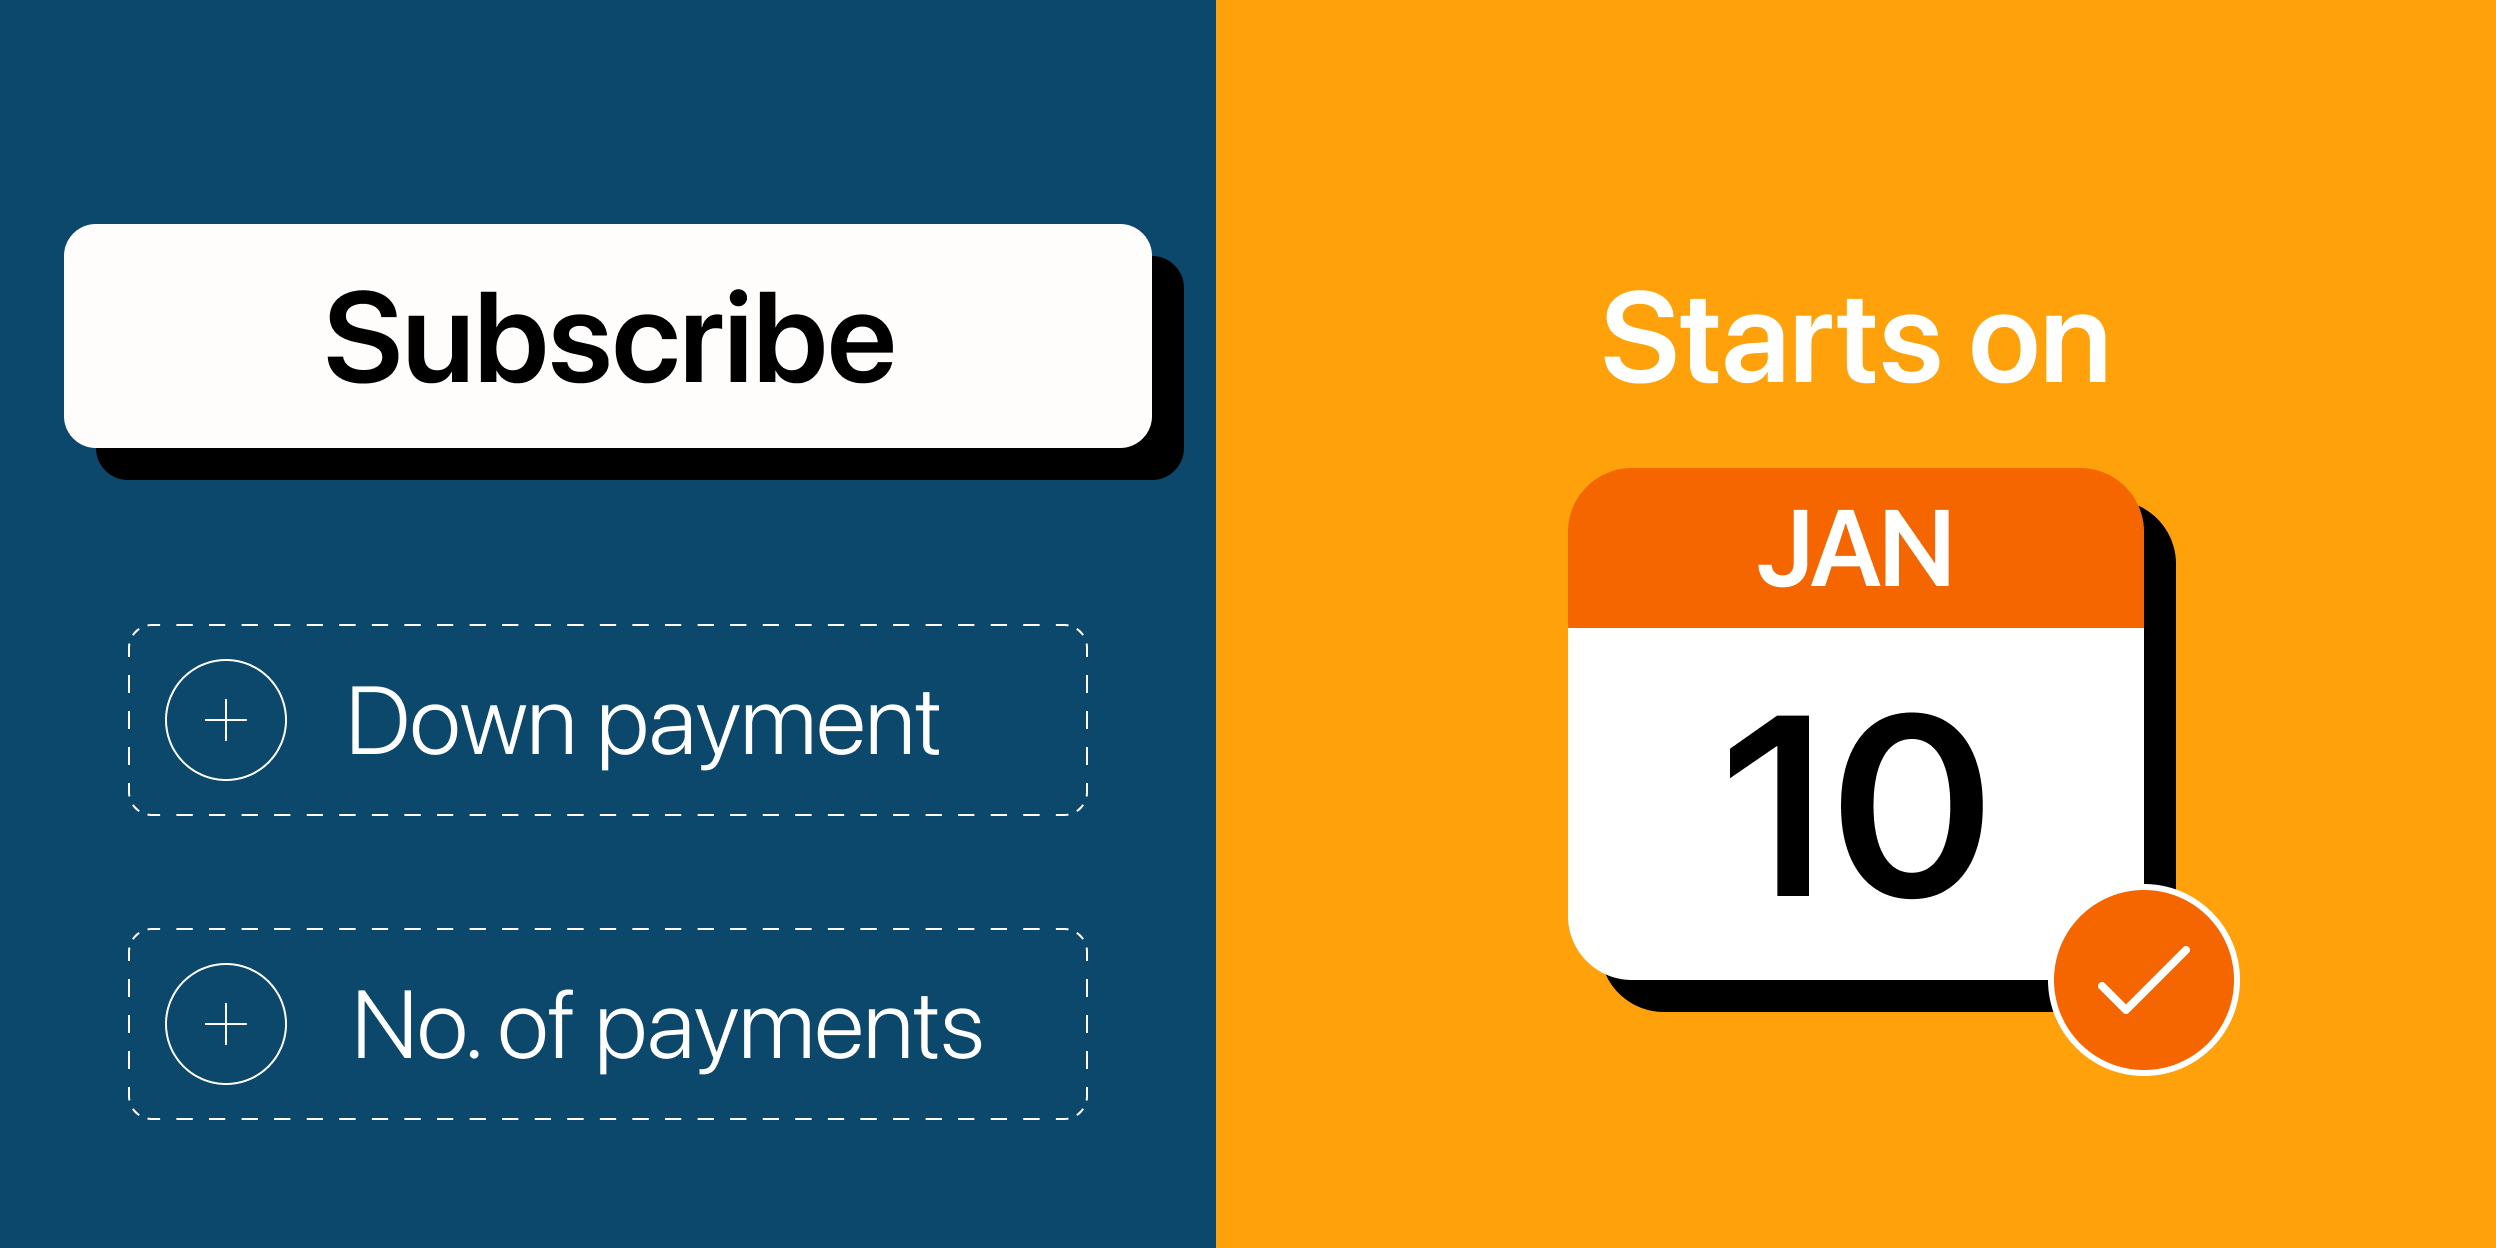 Introducing future start dates for Stripe subscriptions and payment plans